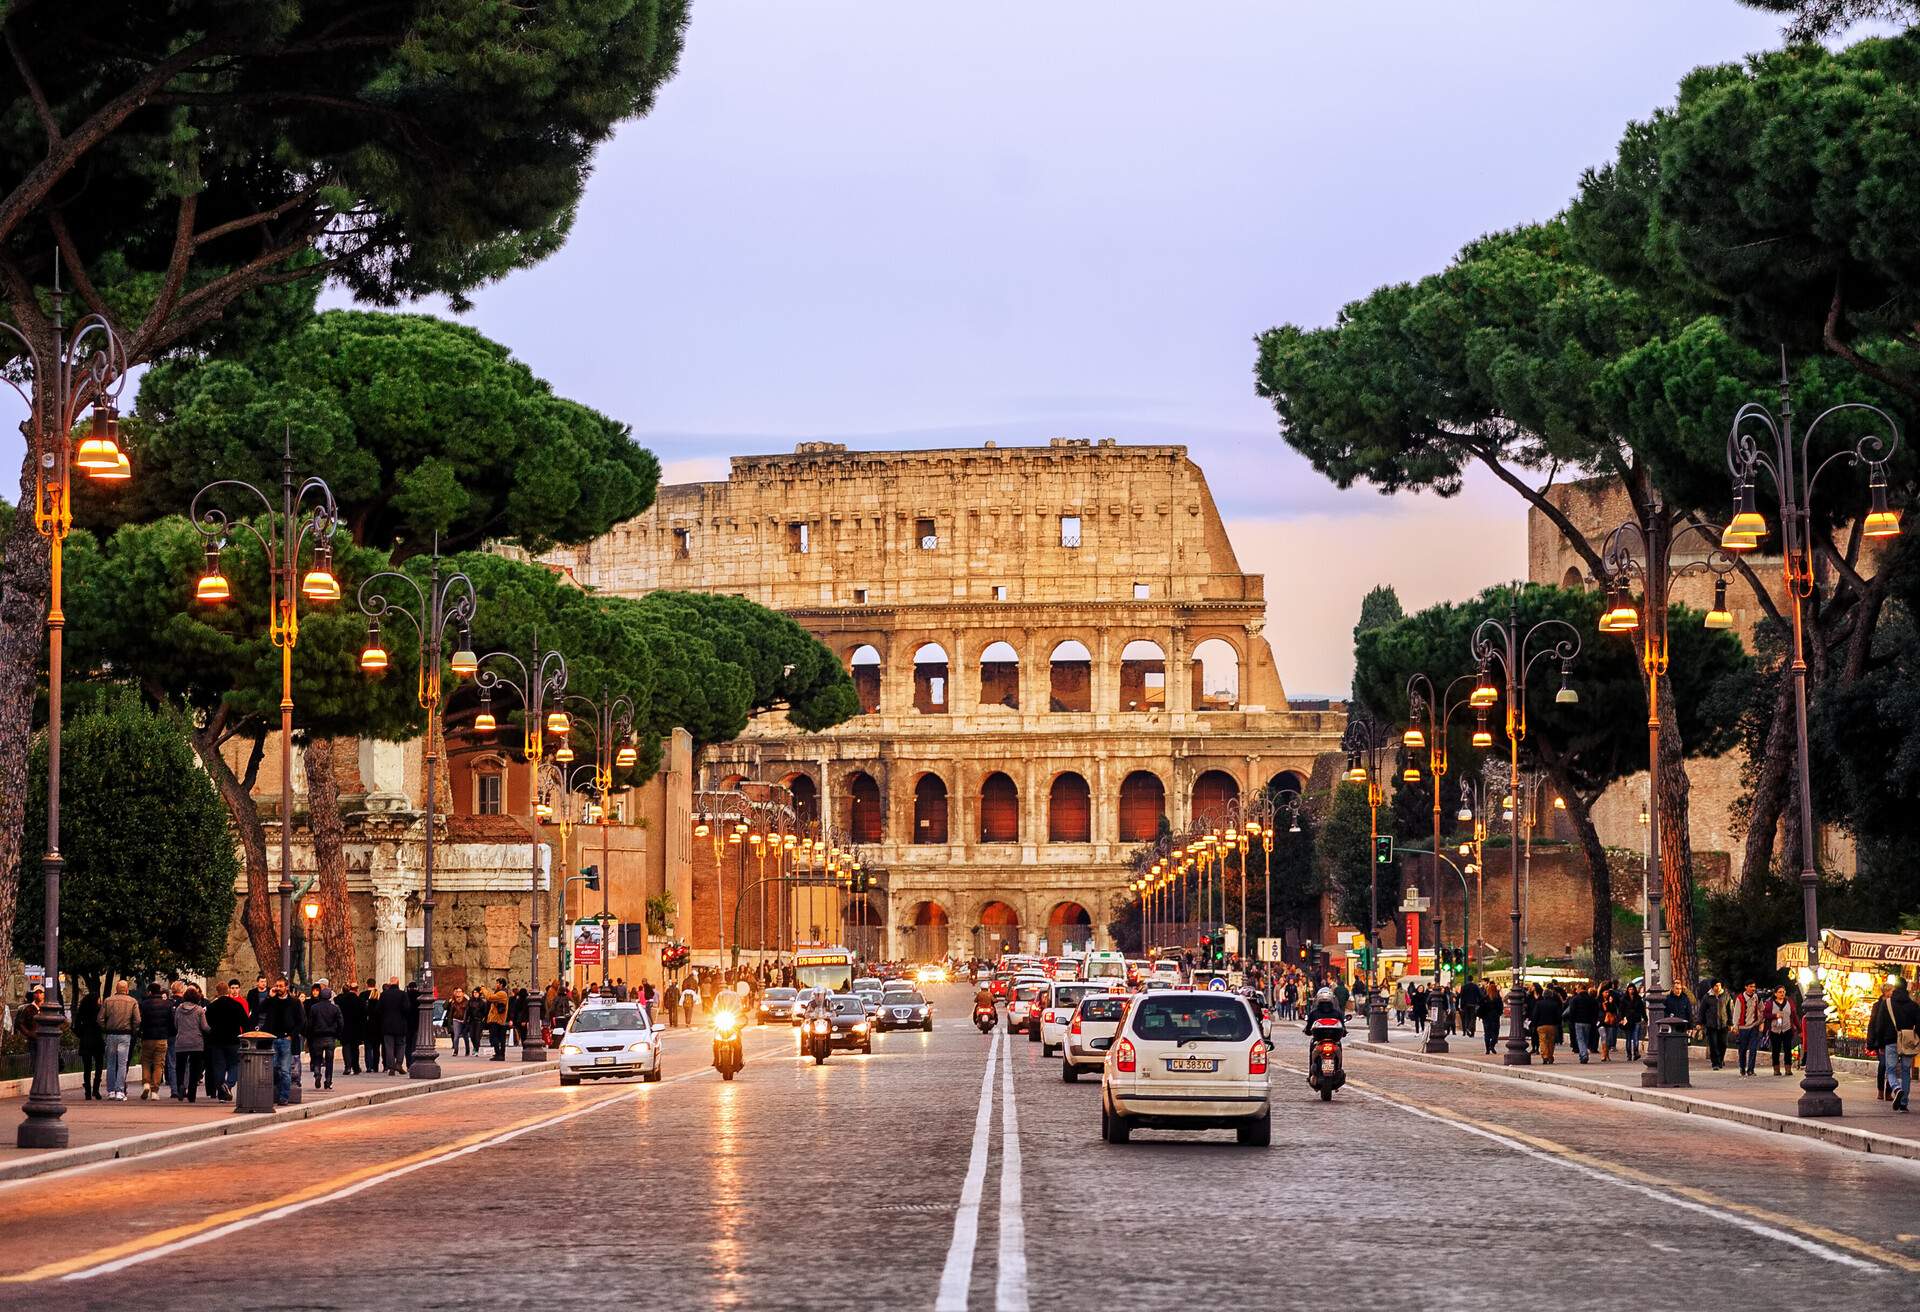 DEST_ITALY_ROME_COLOSSEUM_THEME_CAR_DRIVING_TRAVEL-GettyImages-684002336